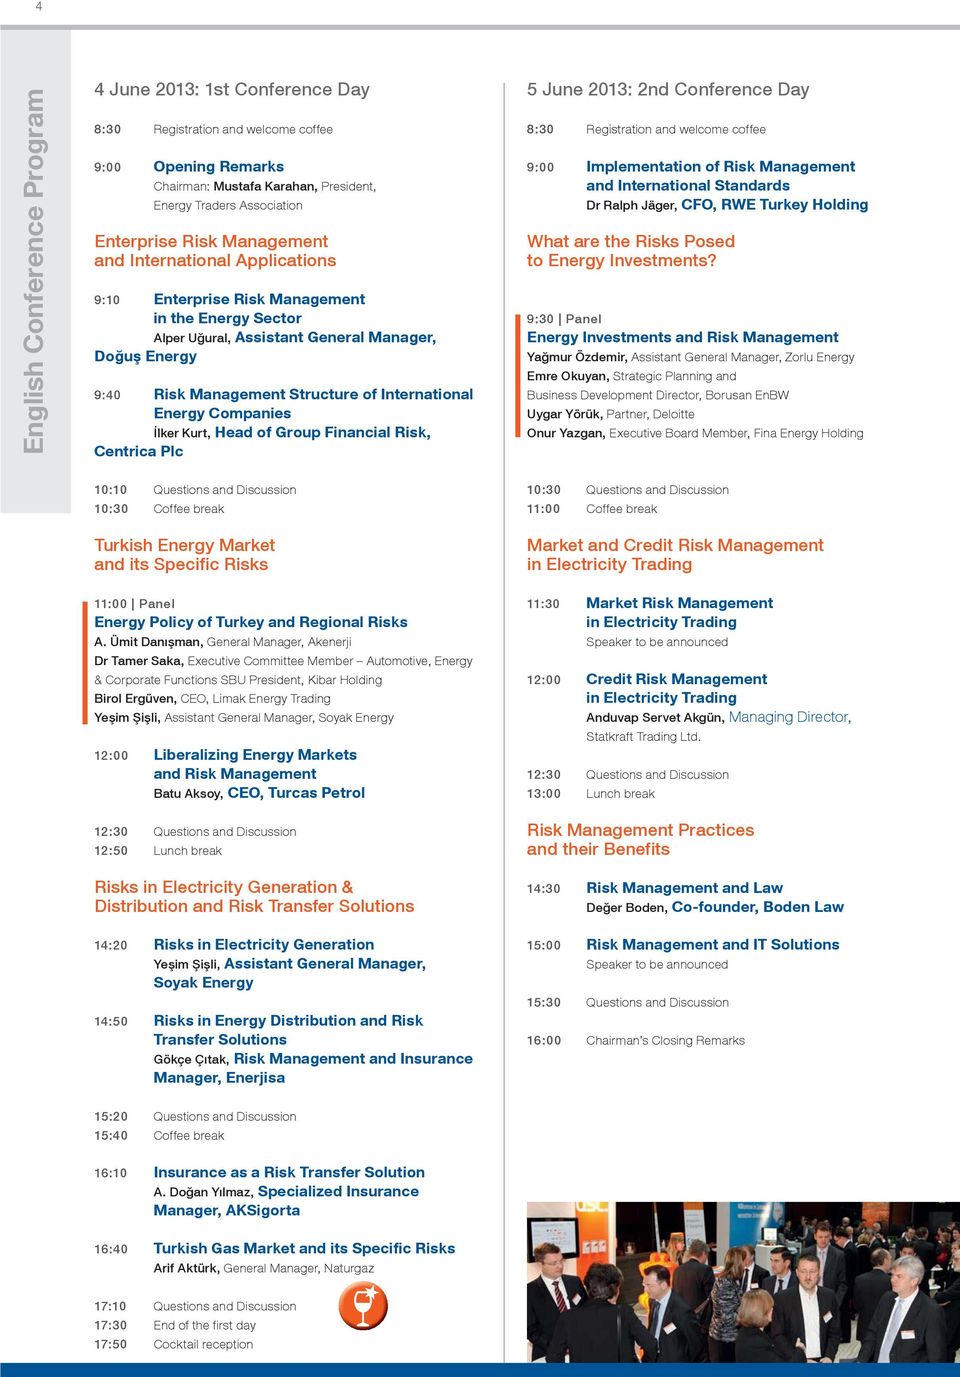 Energy Companies İlker Kurt, Head of Group Financial Risk, Centrica Plc 5 June 2013: 2nd Conference Day 8:30 Registration and welcome coffee 9:00 Implementation of Risk Management and International